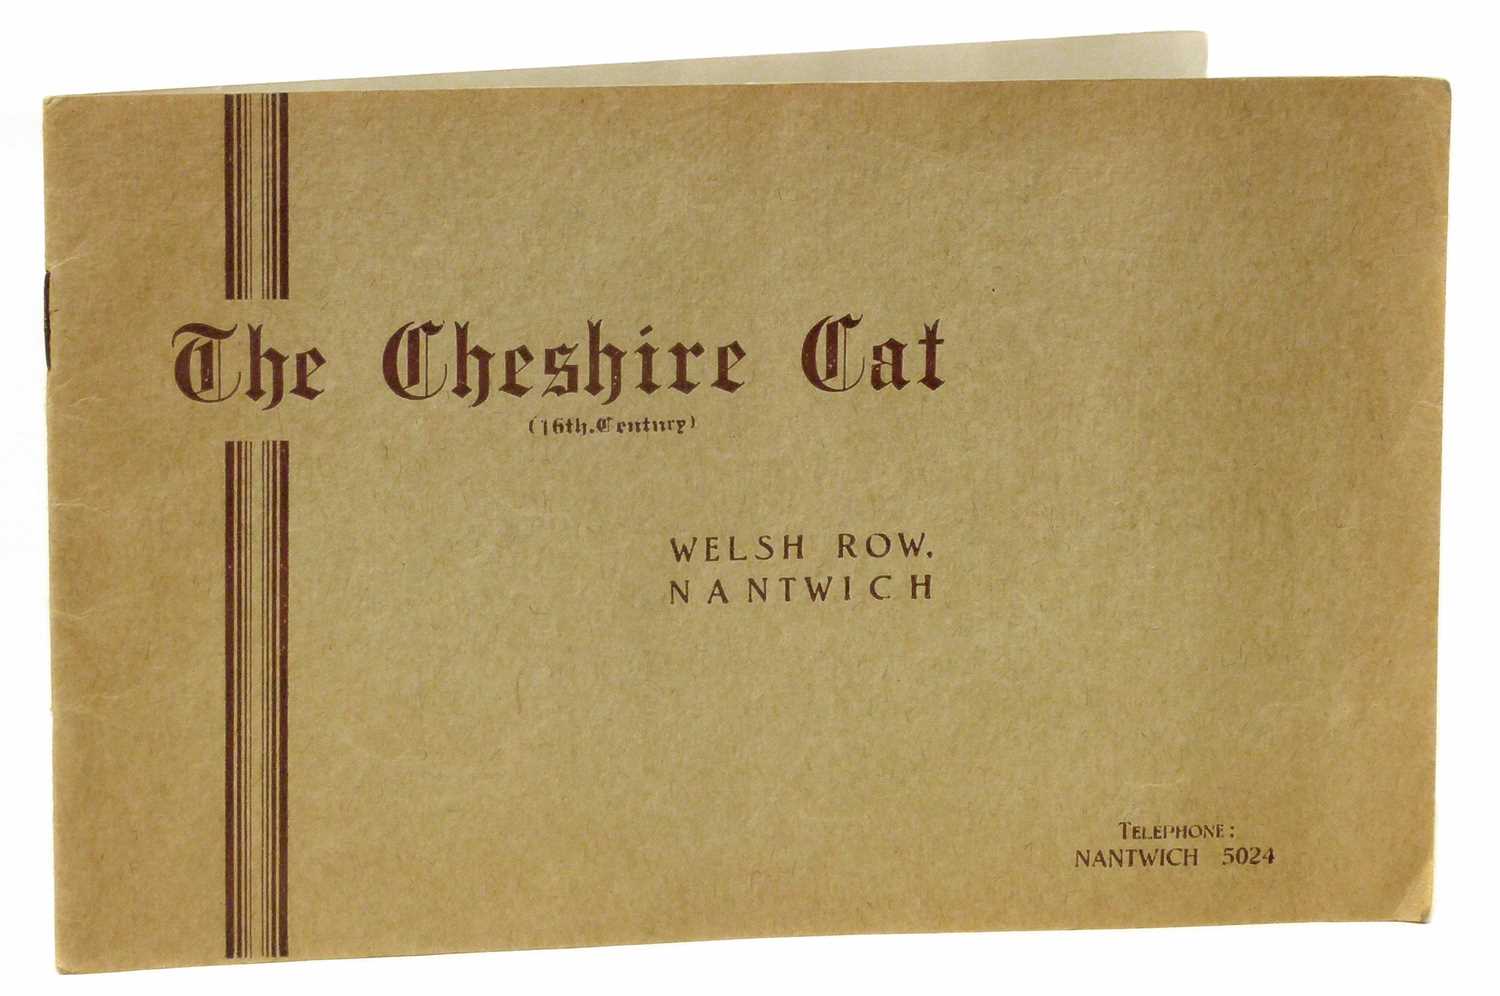 Lot 60 - Information booklet about "The Cheshire Cat, Nantwich".